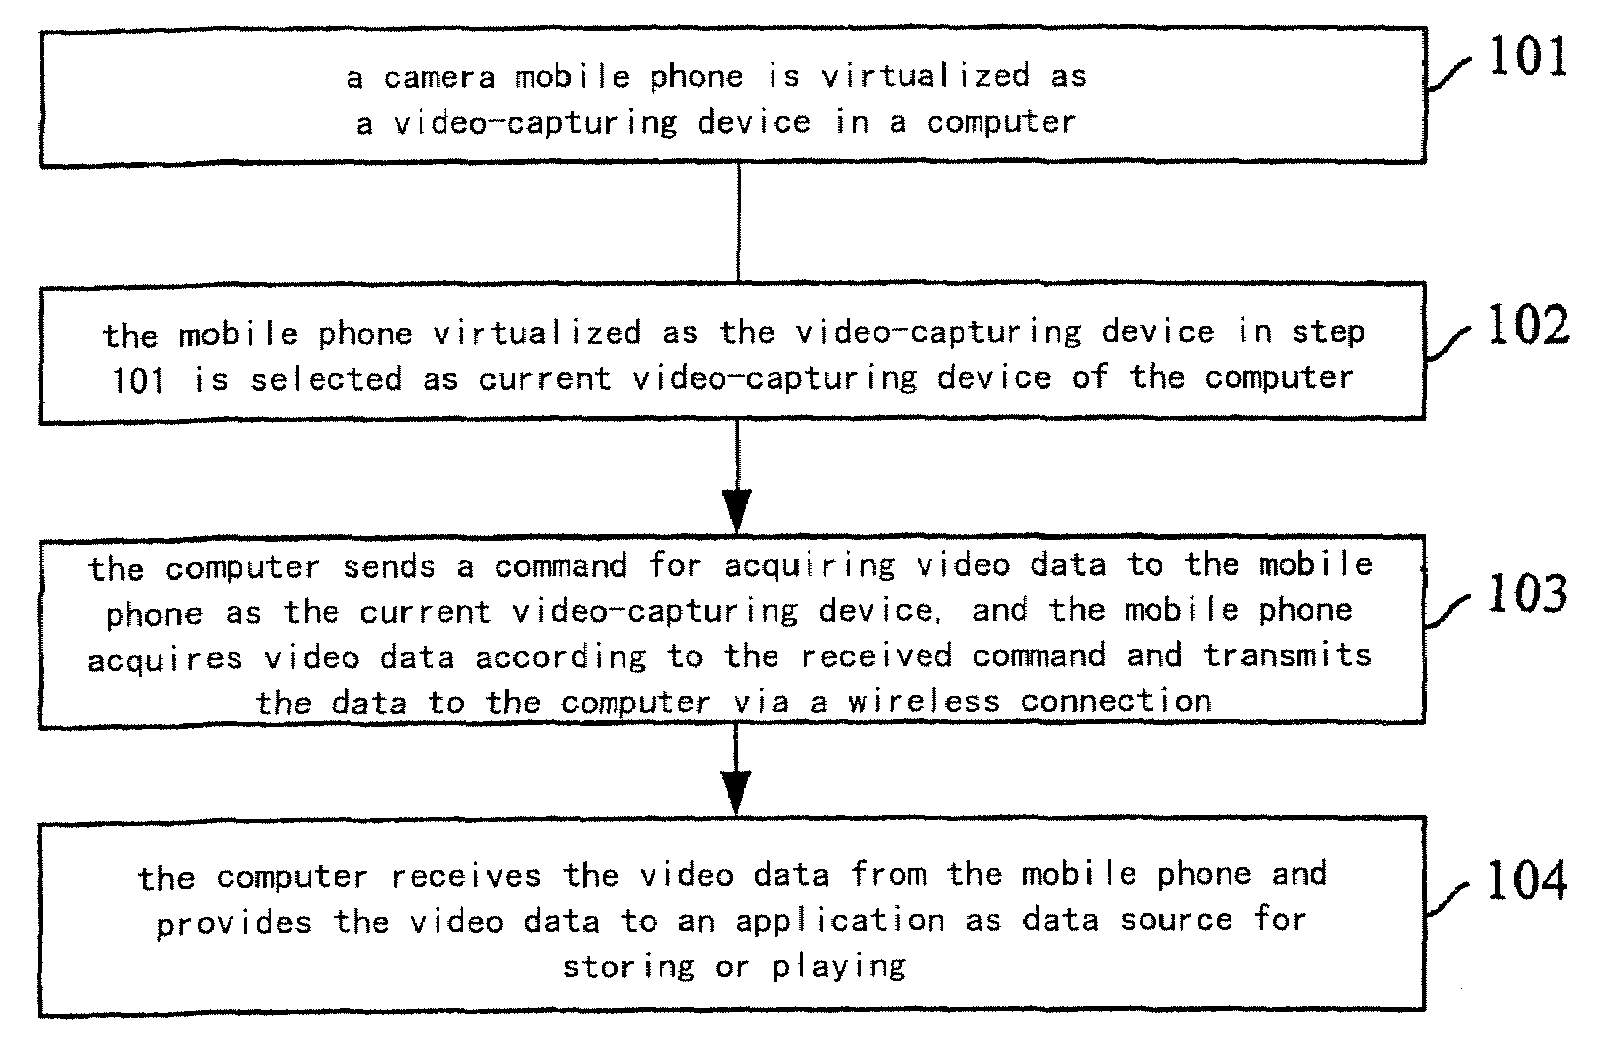 Method for Acquiring Video Data by Using Camera Mobile Phone as Computer Camera